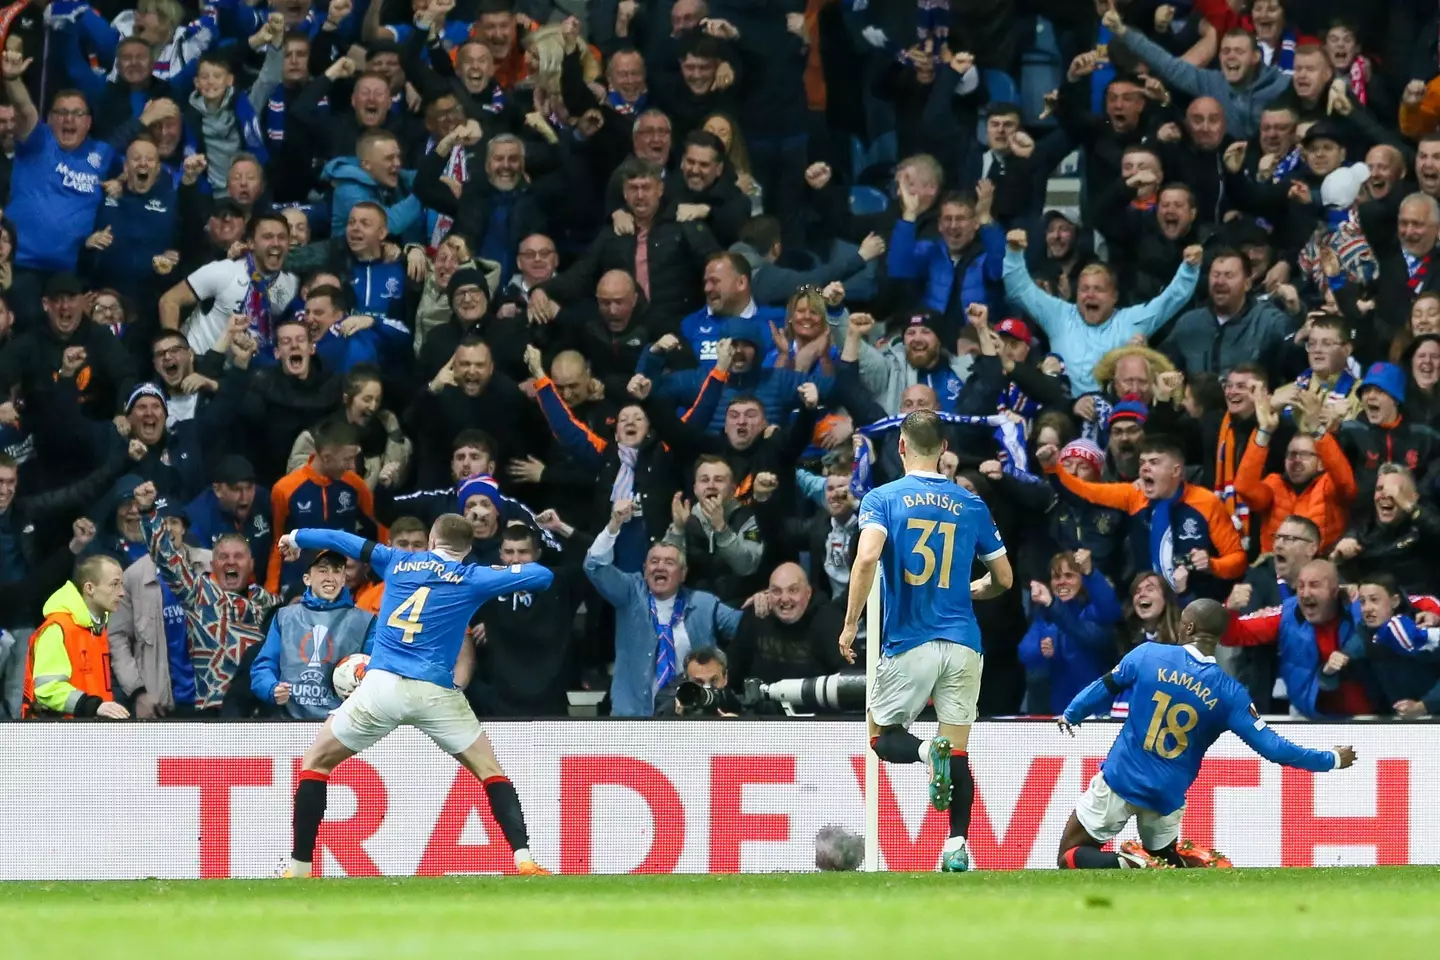 Rangers had some special nights in Europe last season. Image: Alamy